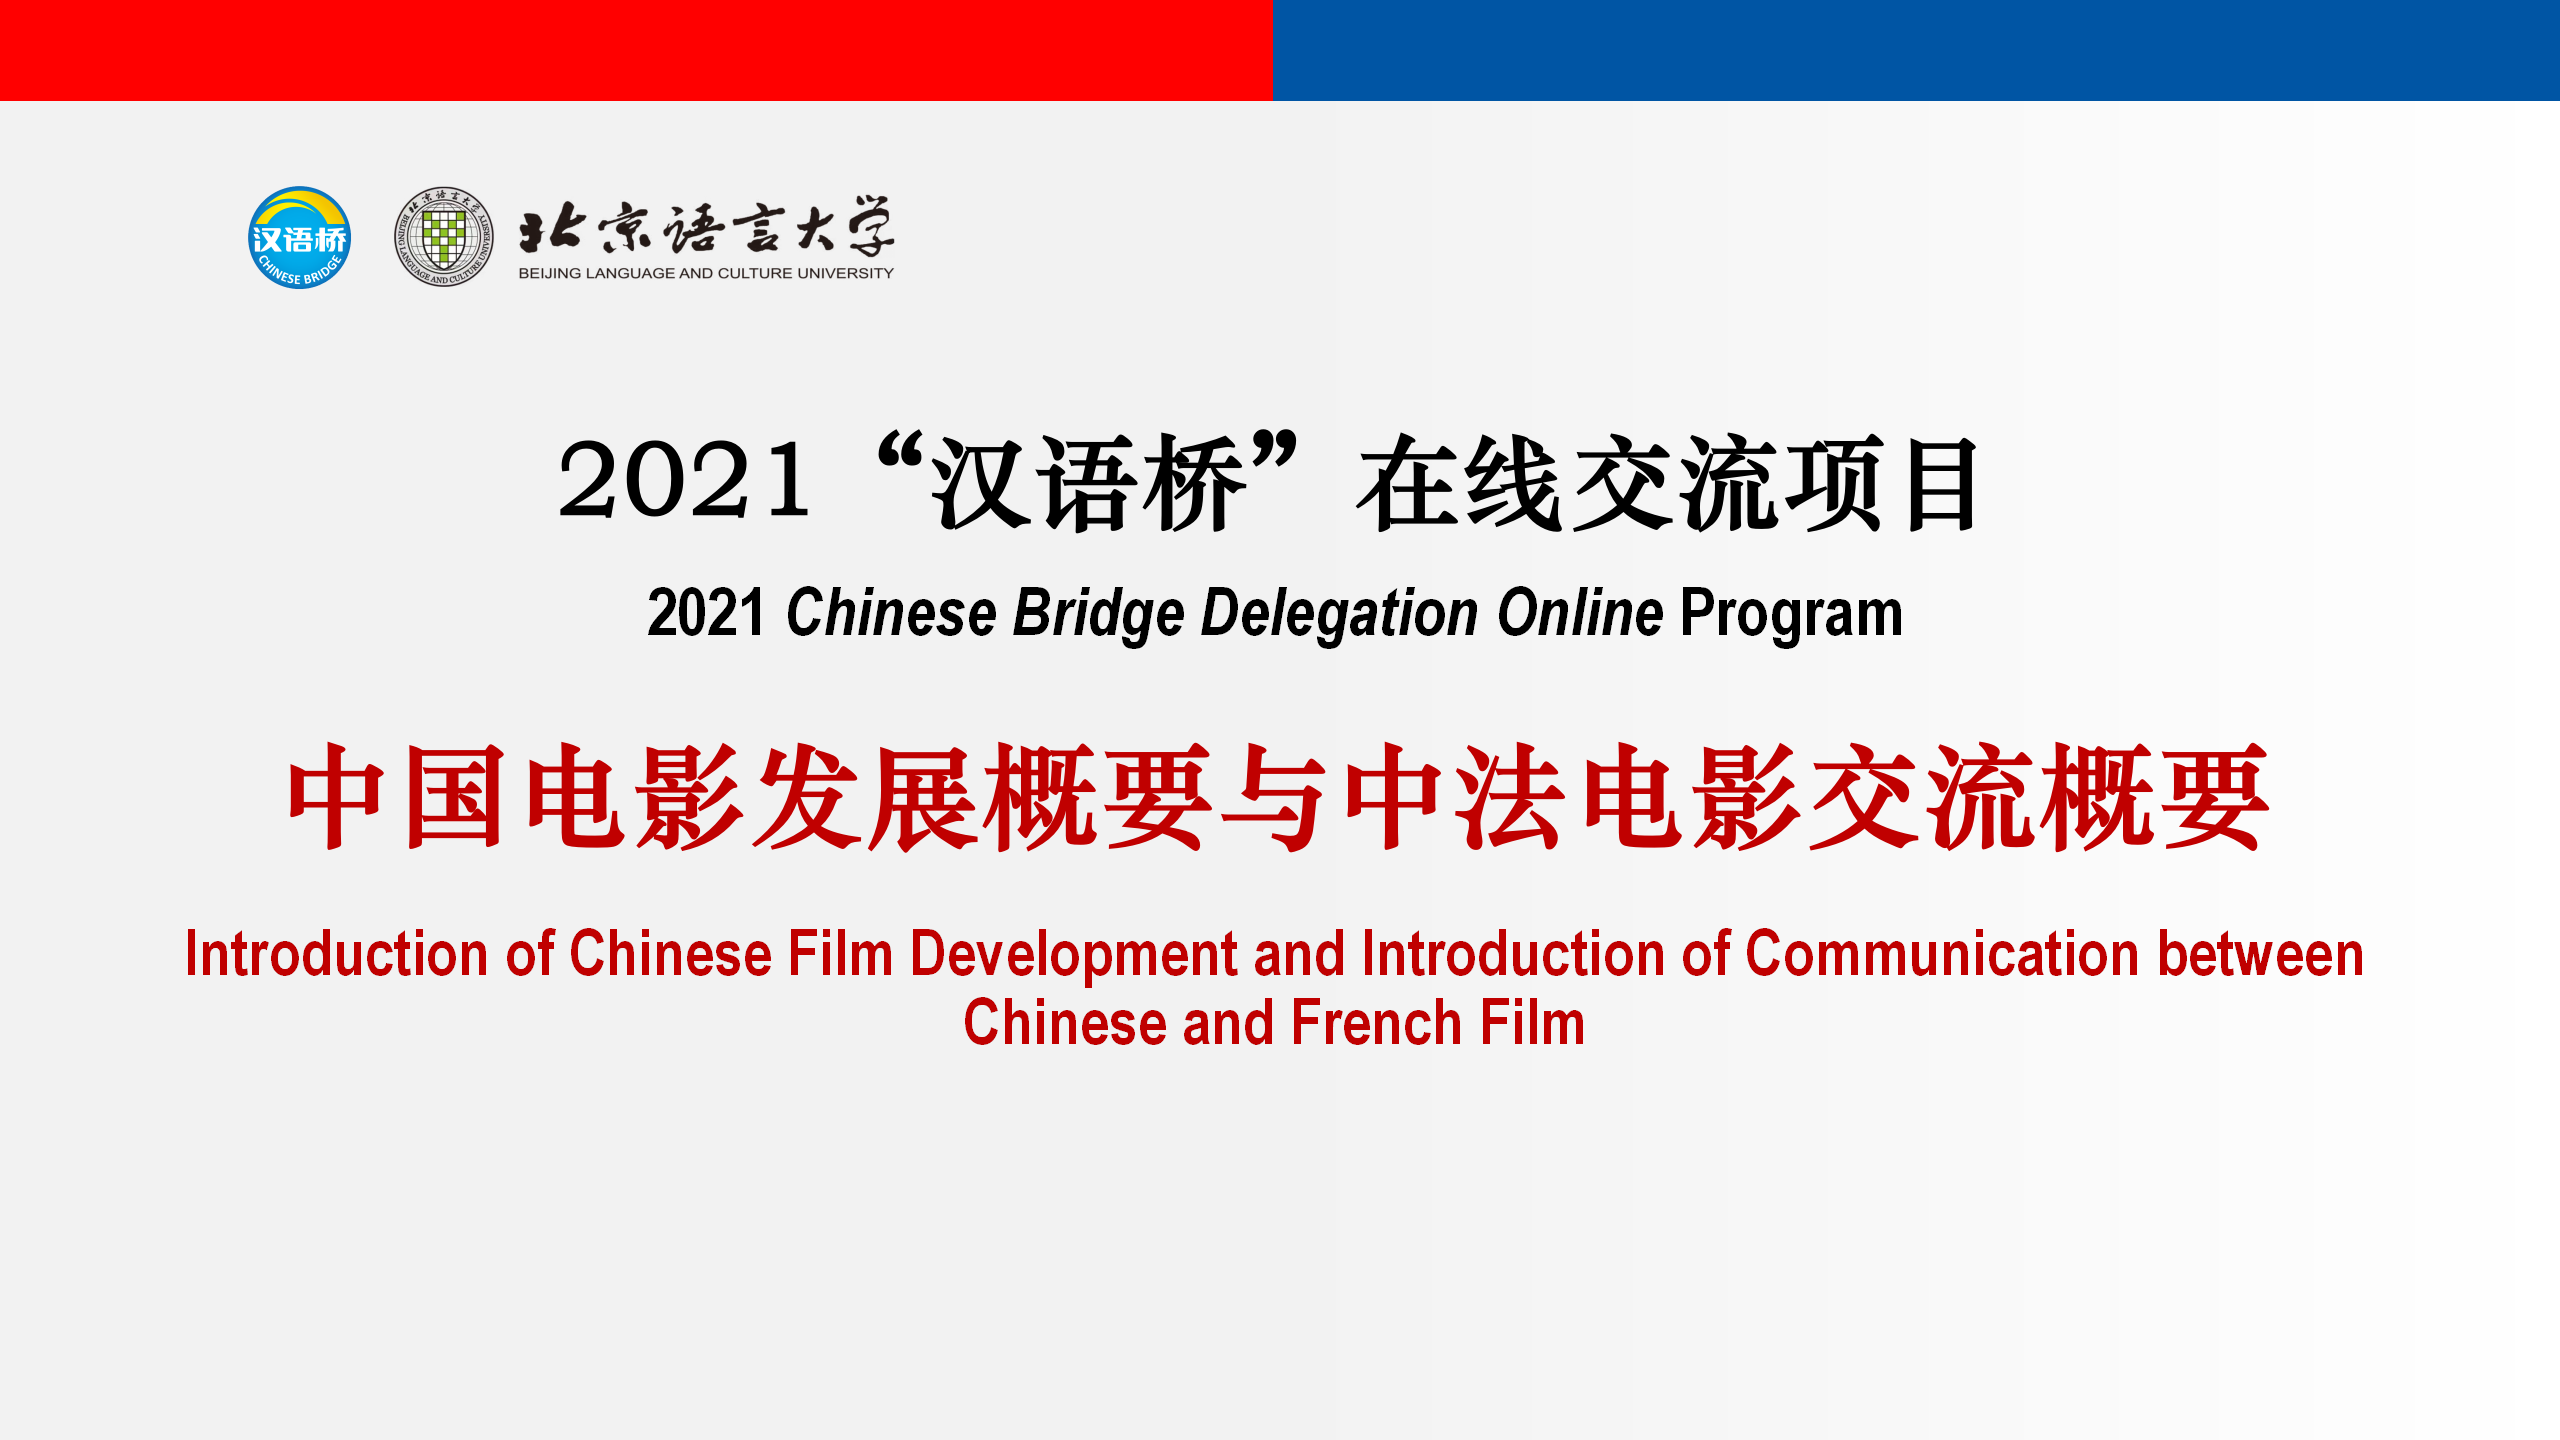 Introduction of Chinese Film Development and Introduction of Communication between Chinese and French Film